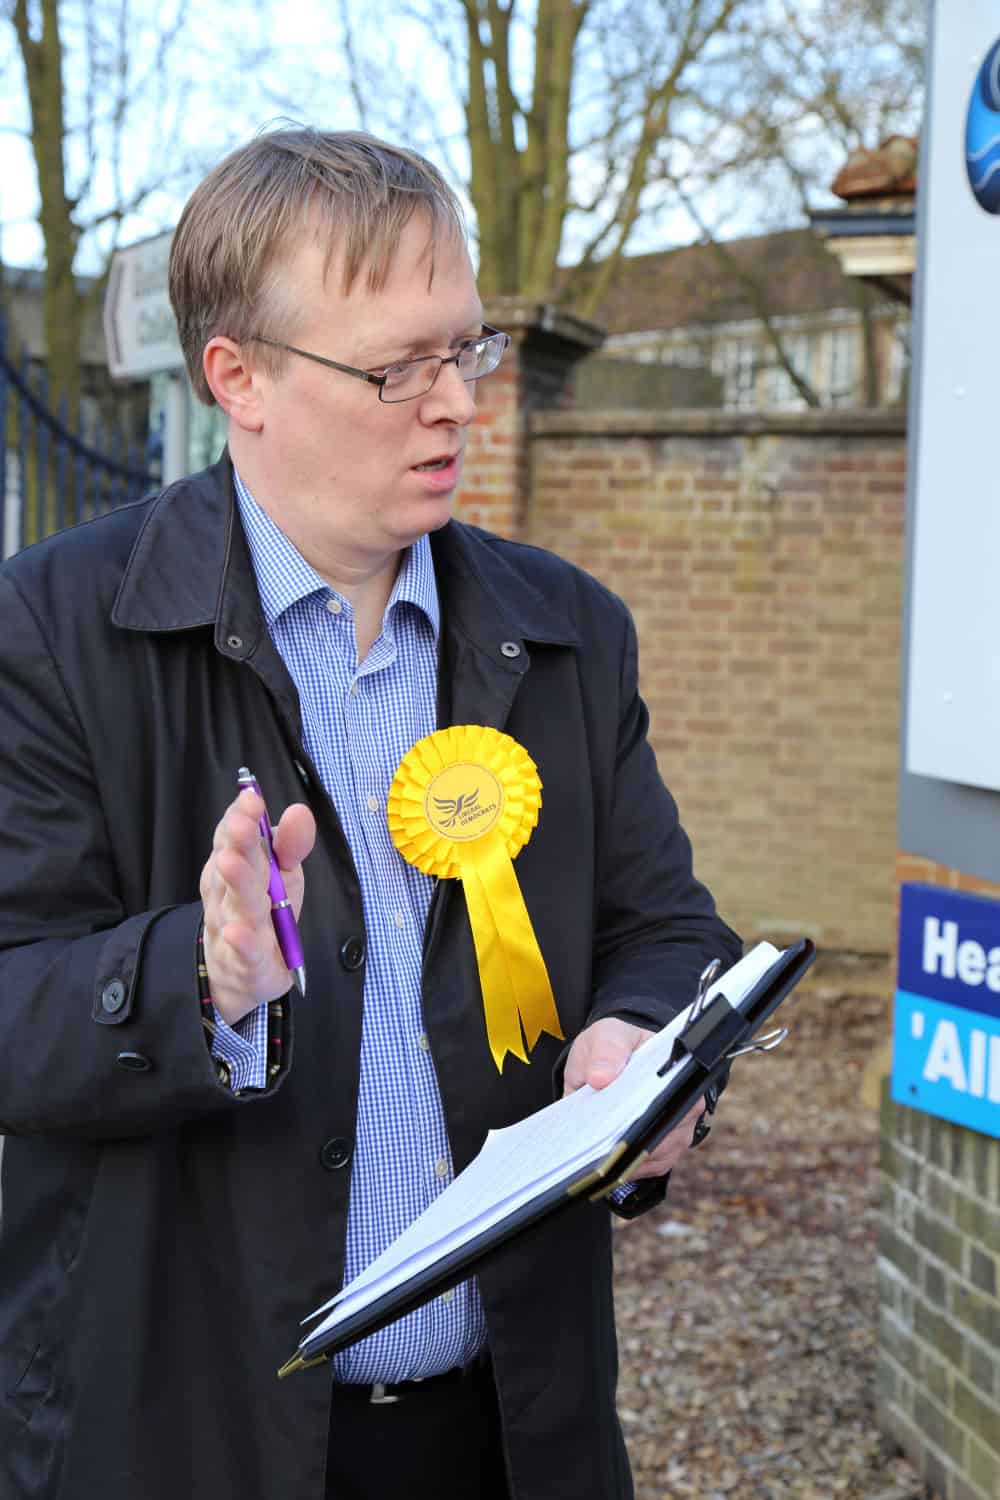 Man in a coat with a yellow ribbon badge holding a clipboard and pen, speaking outdoors near a signpost.